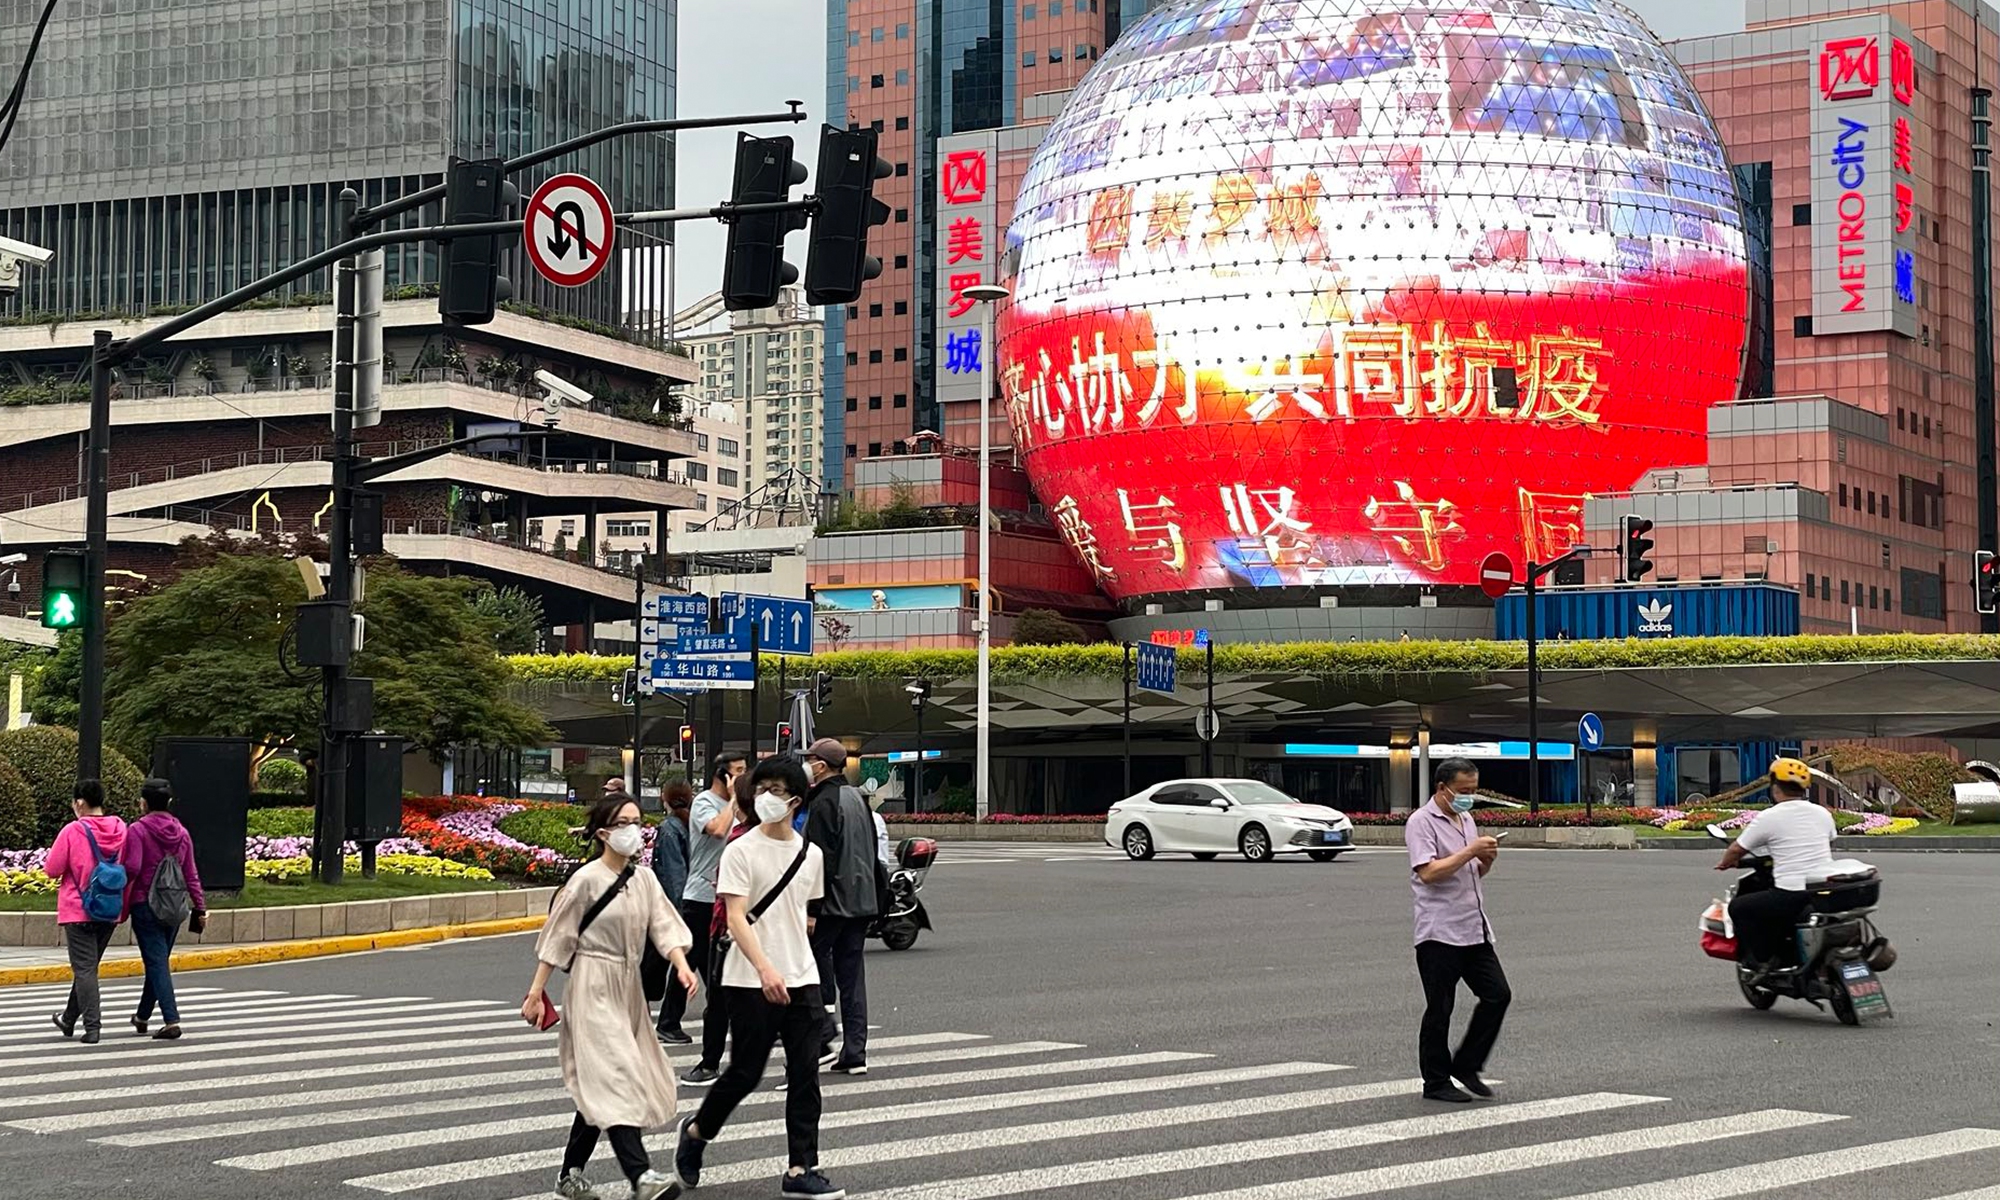 Vehicles and pedestrians are seen on the intersection surrounding Metro City, a landmark shopping mall in Xuhui district, East China's Shanghai on May 30. Photo: Feng Yu/GT